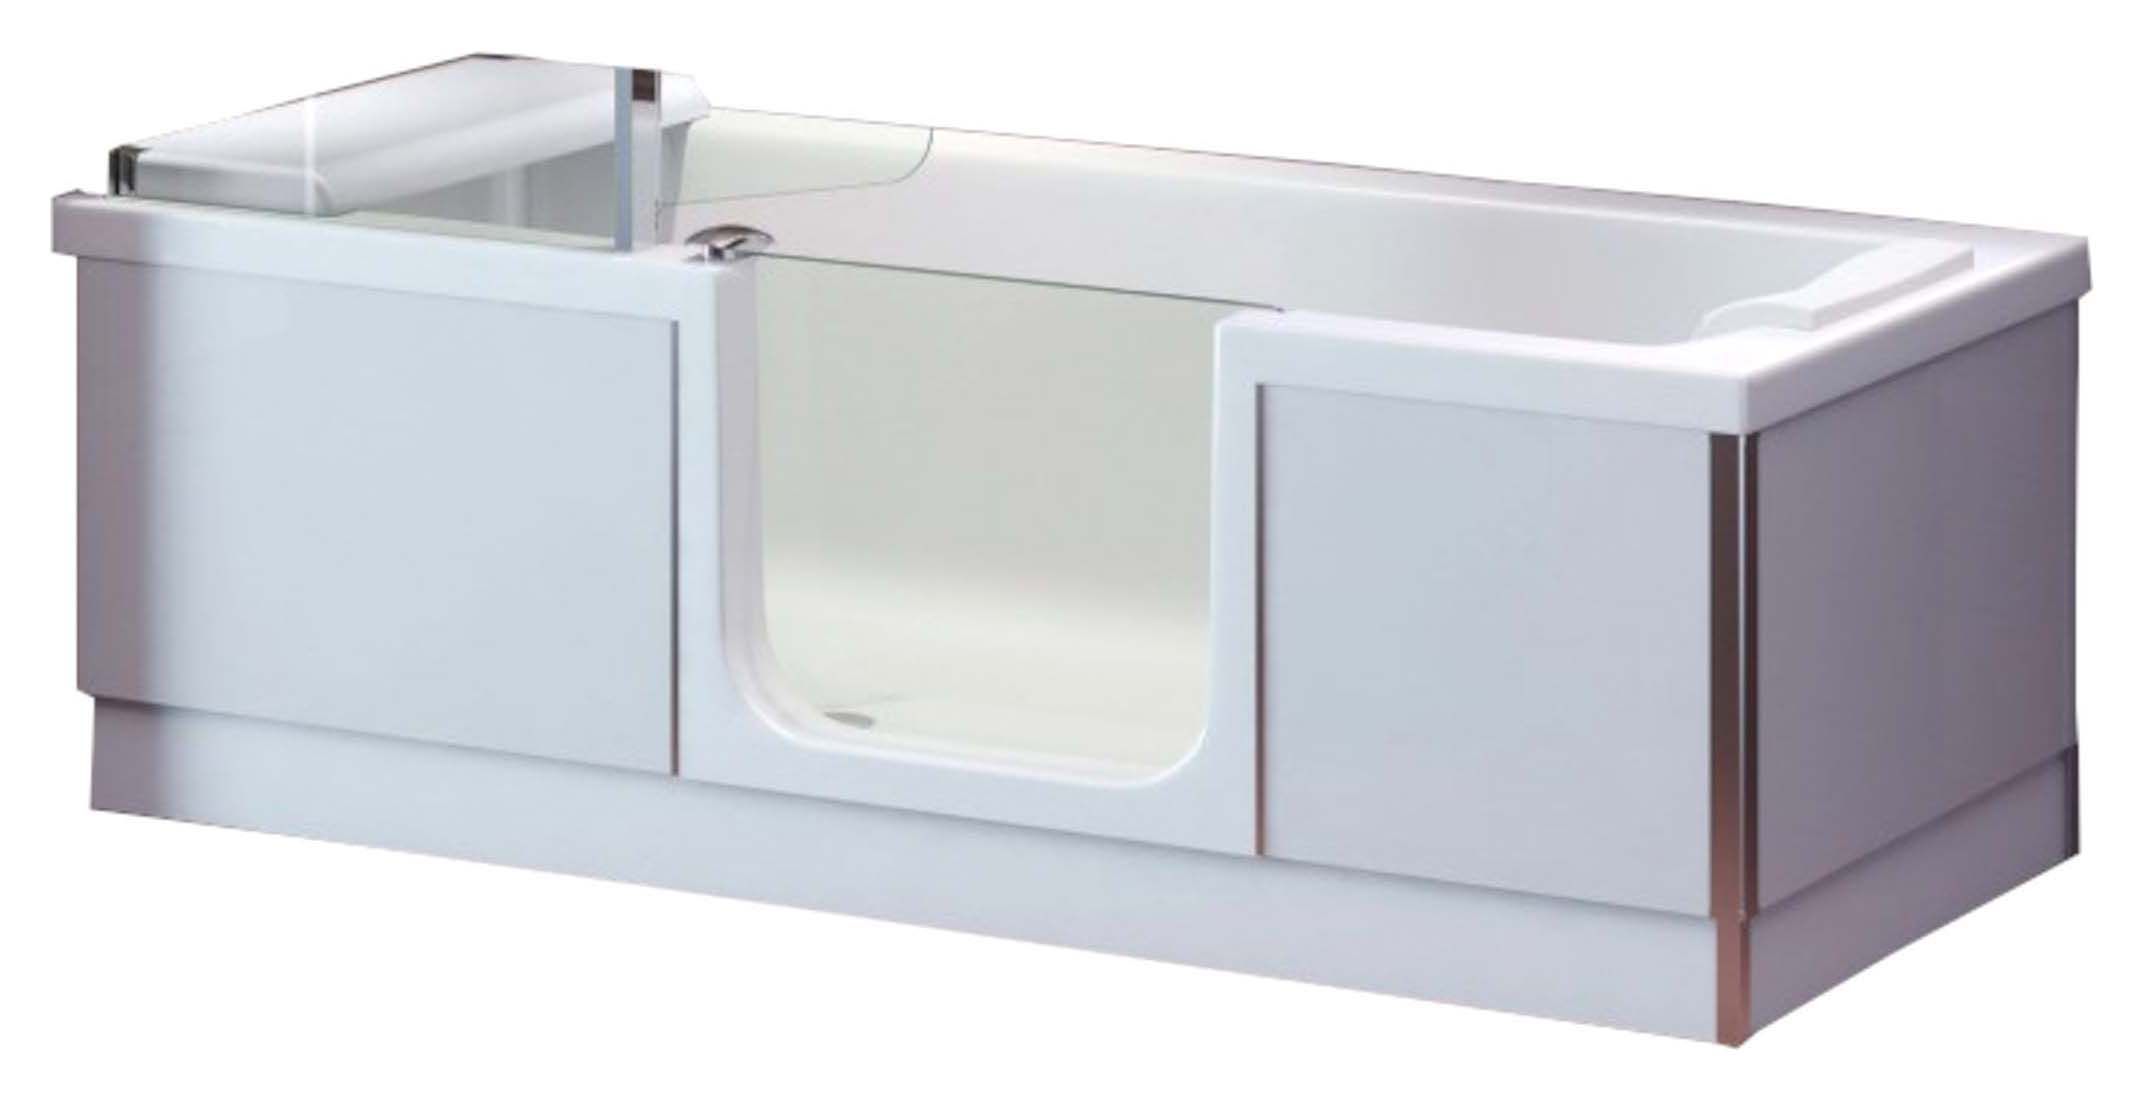 Wickes Style Right Hand Easy Access Bath - 1700 x 750mm